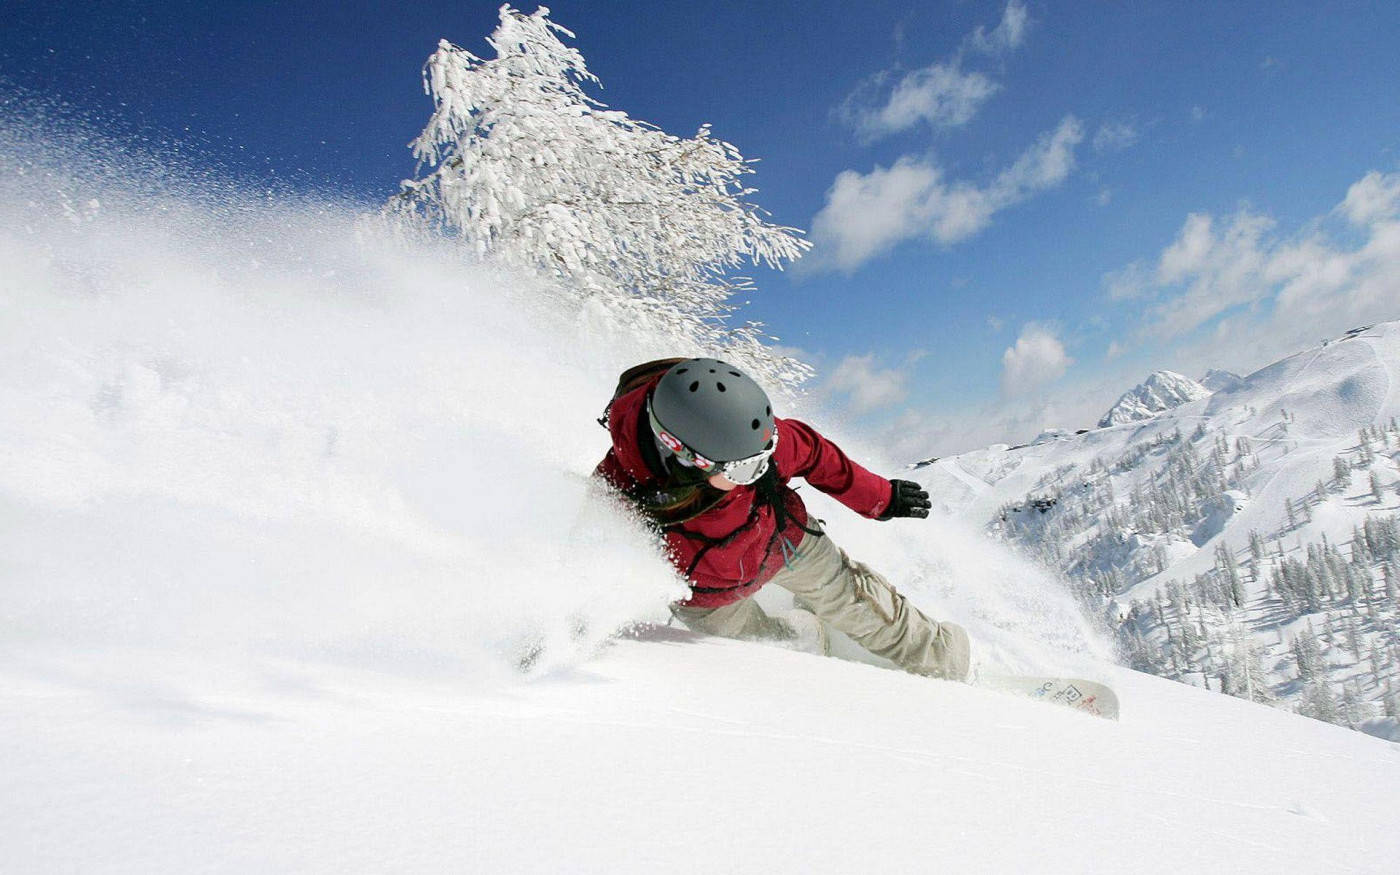 Man In Red With Snowboard Dashing Through Snow Picture